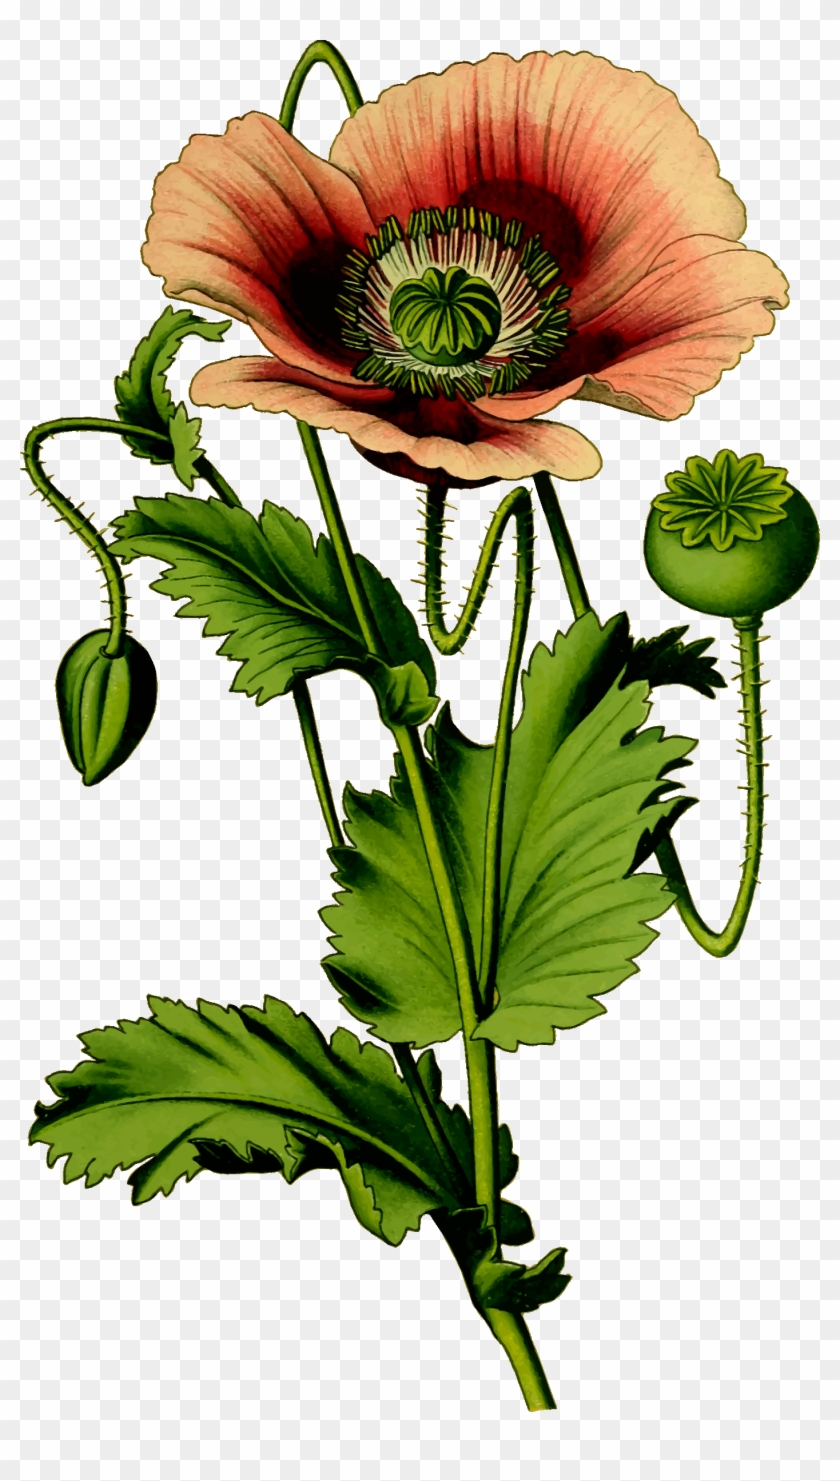 Free Photos > Vector Images > Opium Poppy Plant Vector - Opium Poppy Png #307712